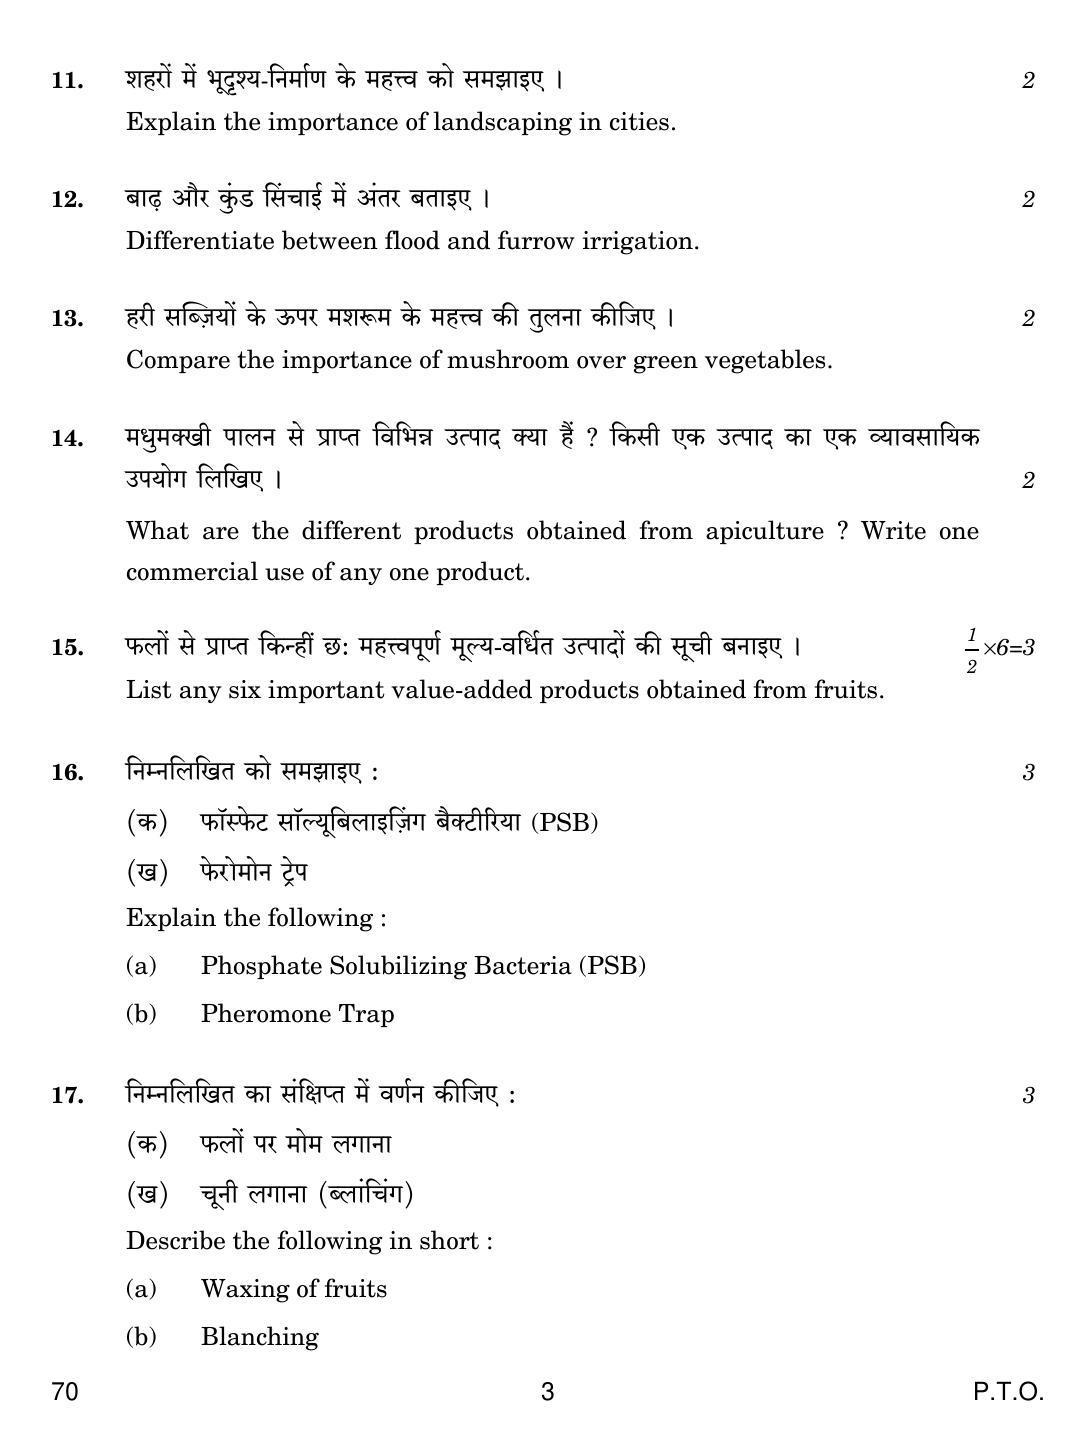 CBSE Class 12 70 AGRICULTURE 2019 Compartment Question Paper - Page 3